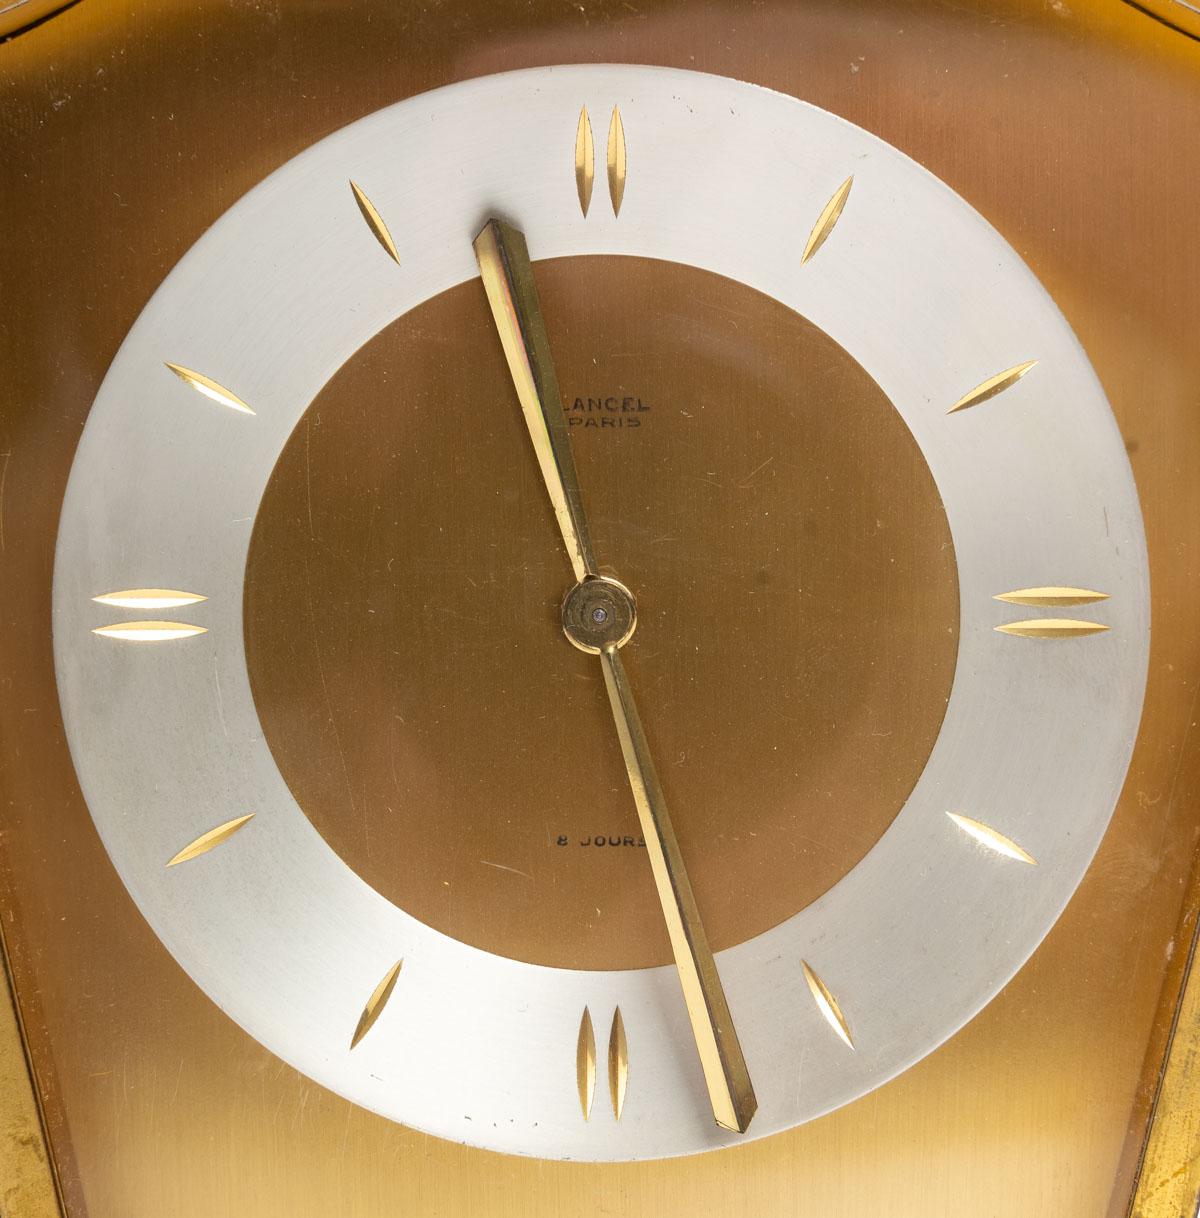 Desk clock of the LANCEL Paris brand from the 1940s, gilt bronze, used and patinated with gilding.
H: 22 cm, W: 17 cm, D: 7.5 cm